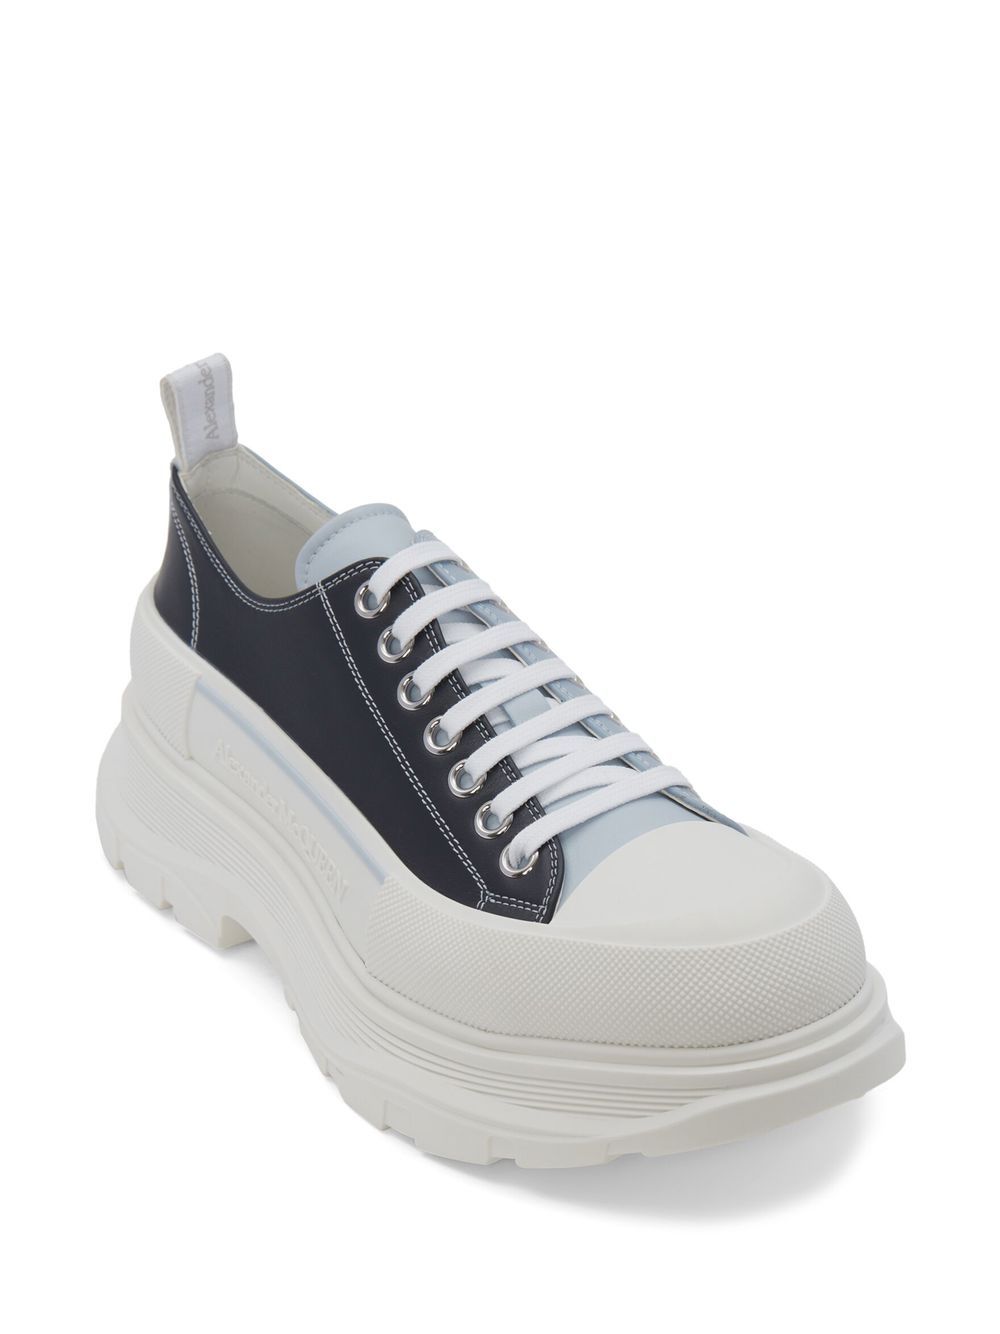 Tread slick lace-up sneakers